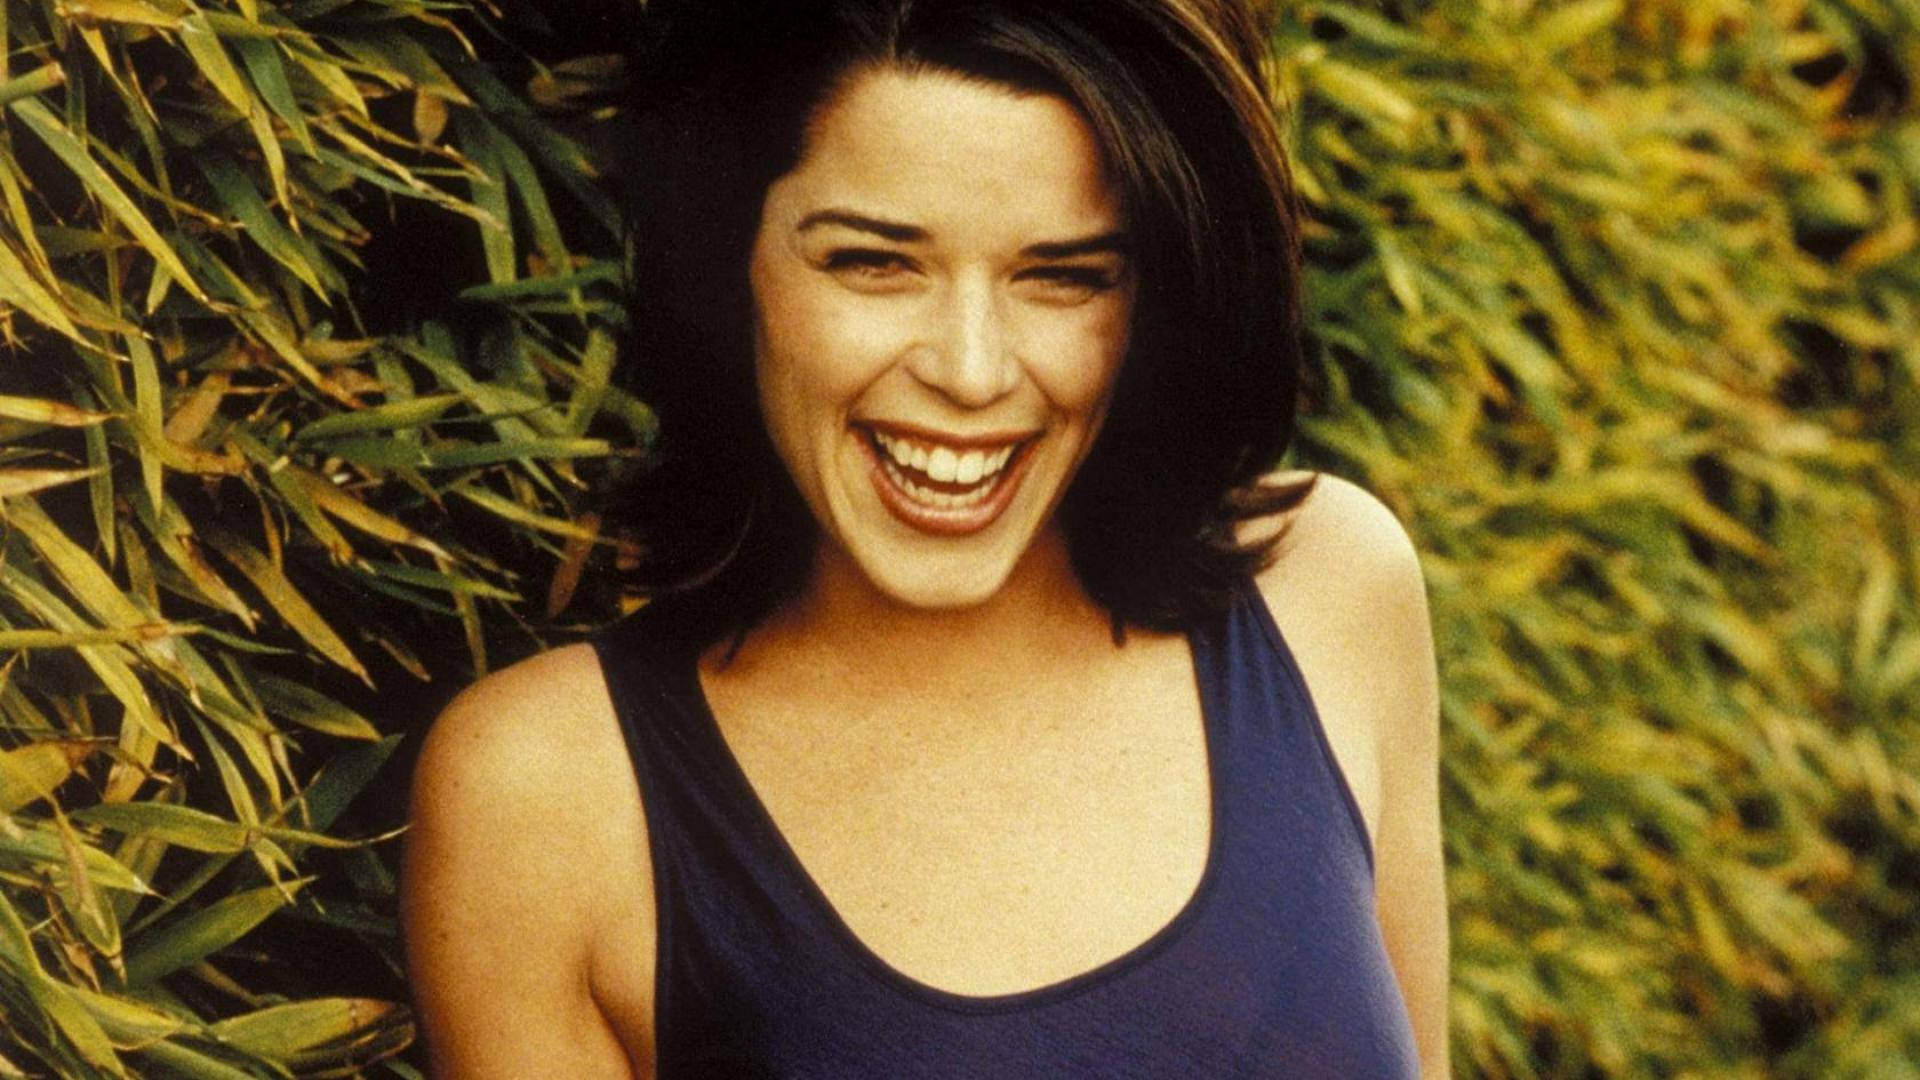 Smiling Neve Campbell Wallpaper